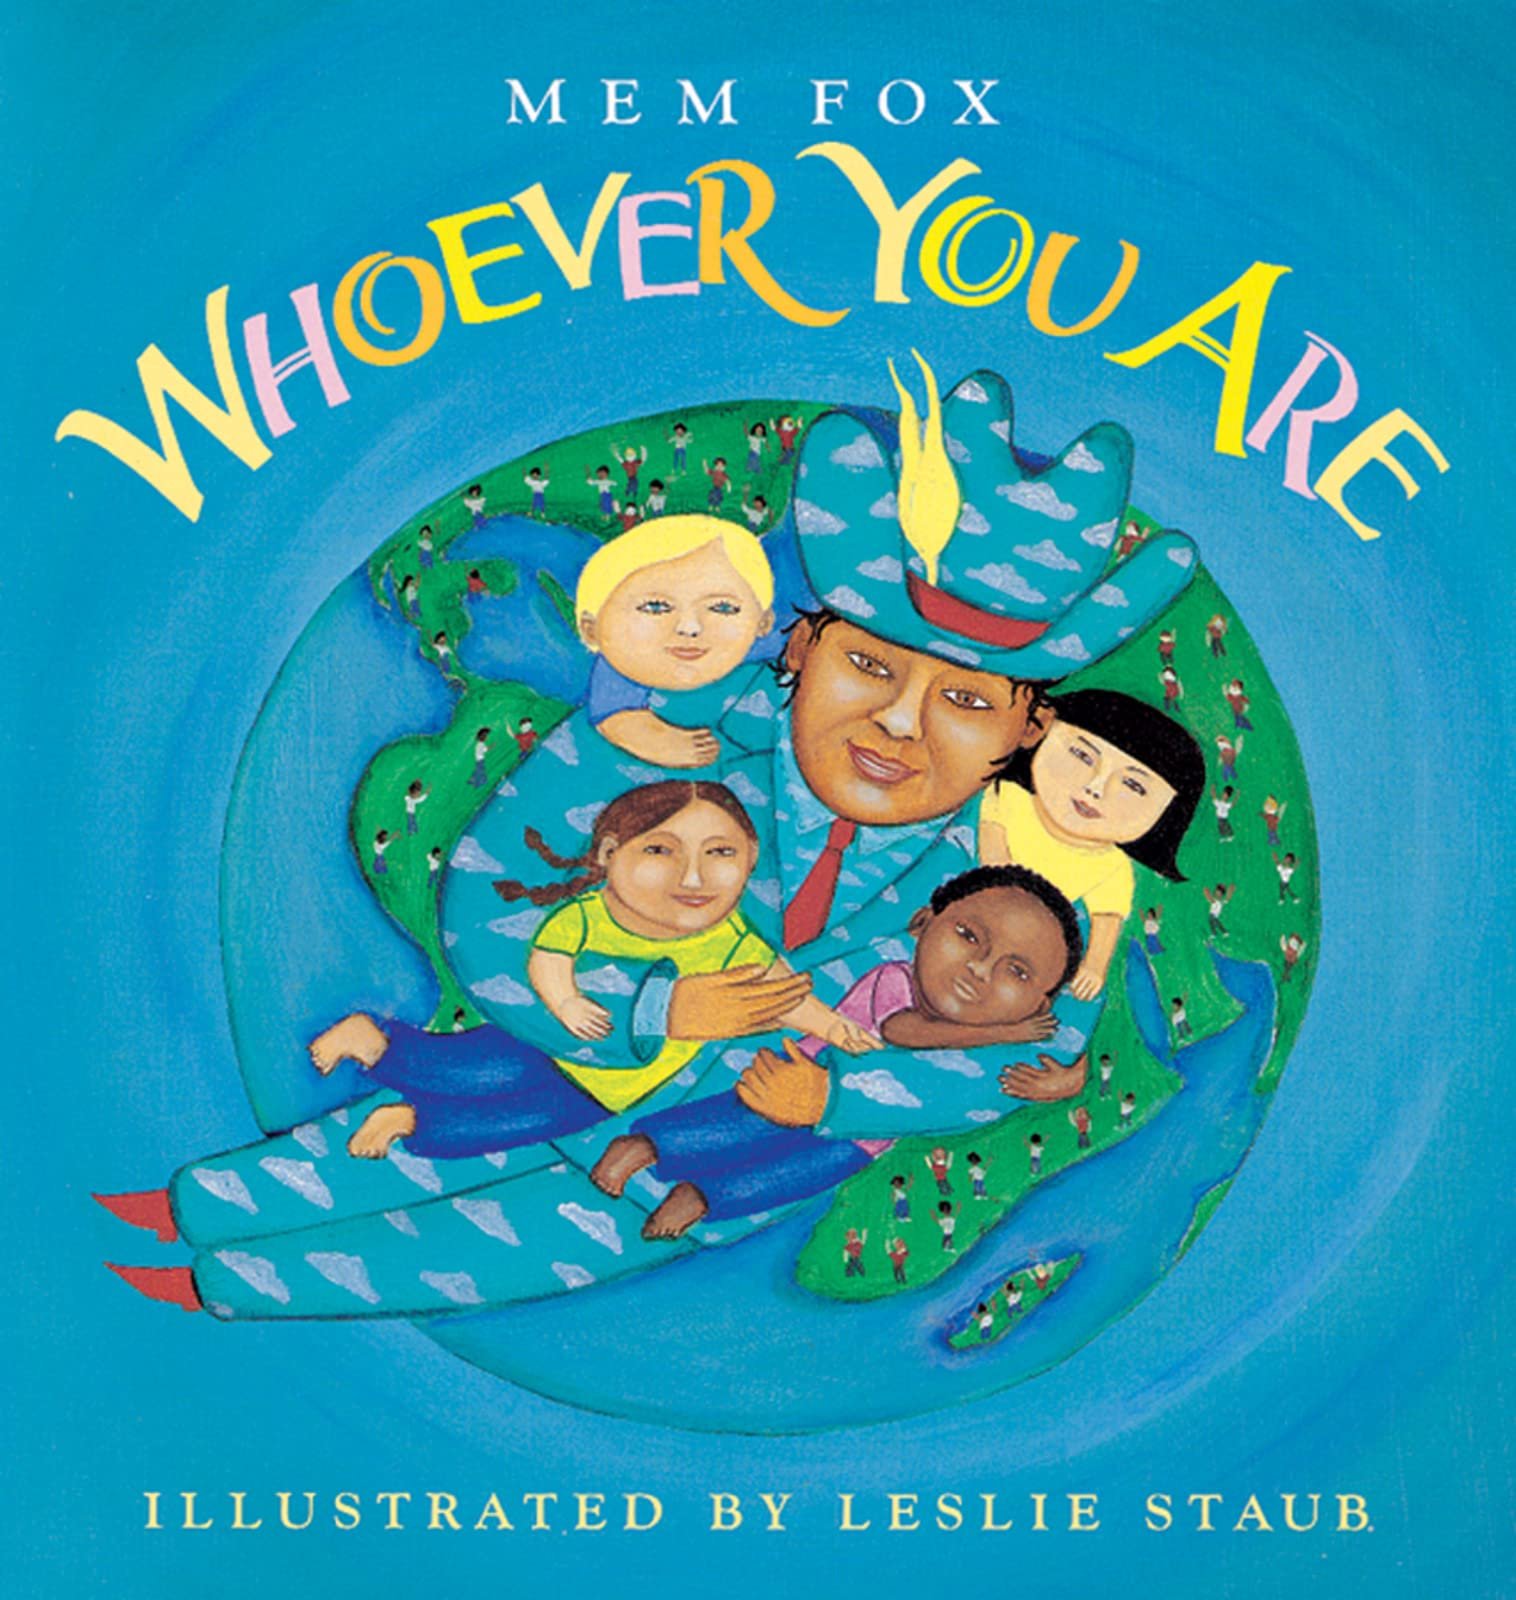 Embrace Diversity with Inspiring Picture Books — Doing Good Together™